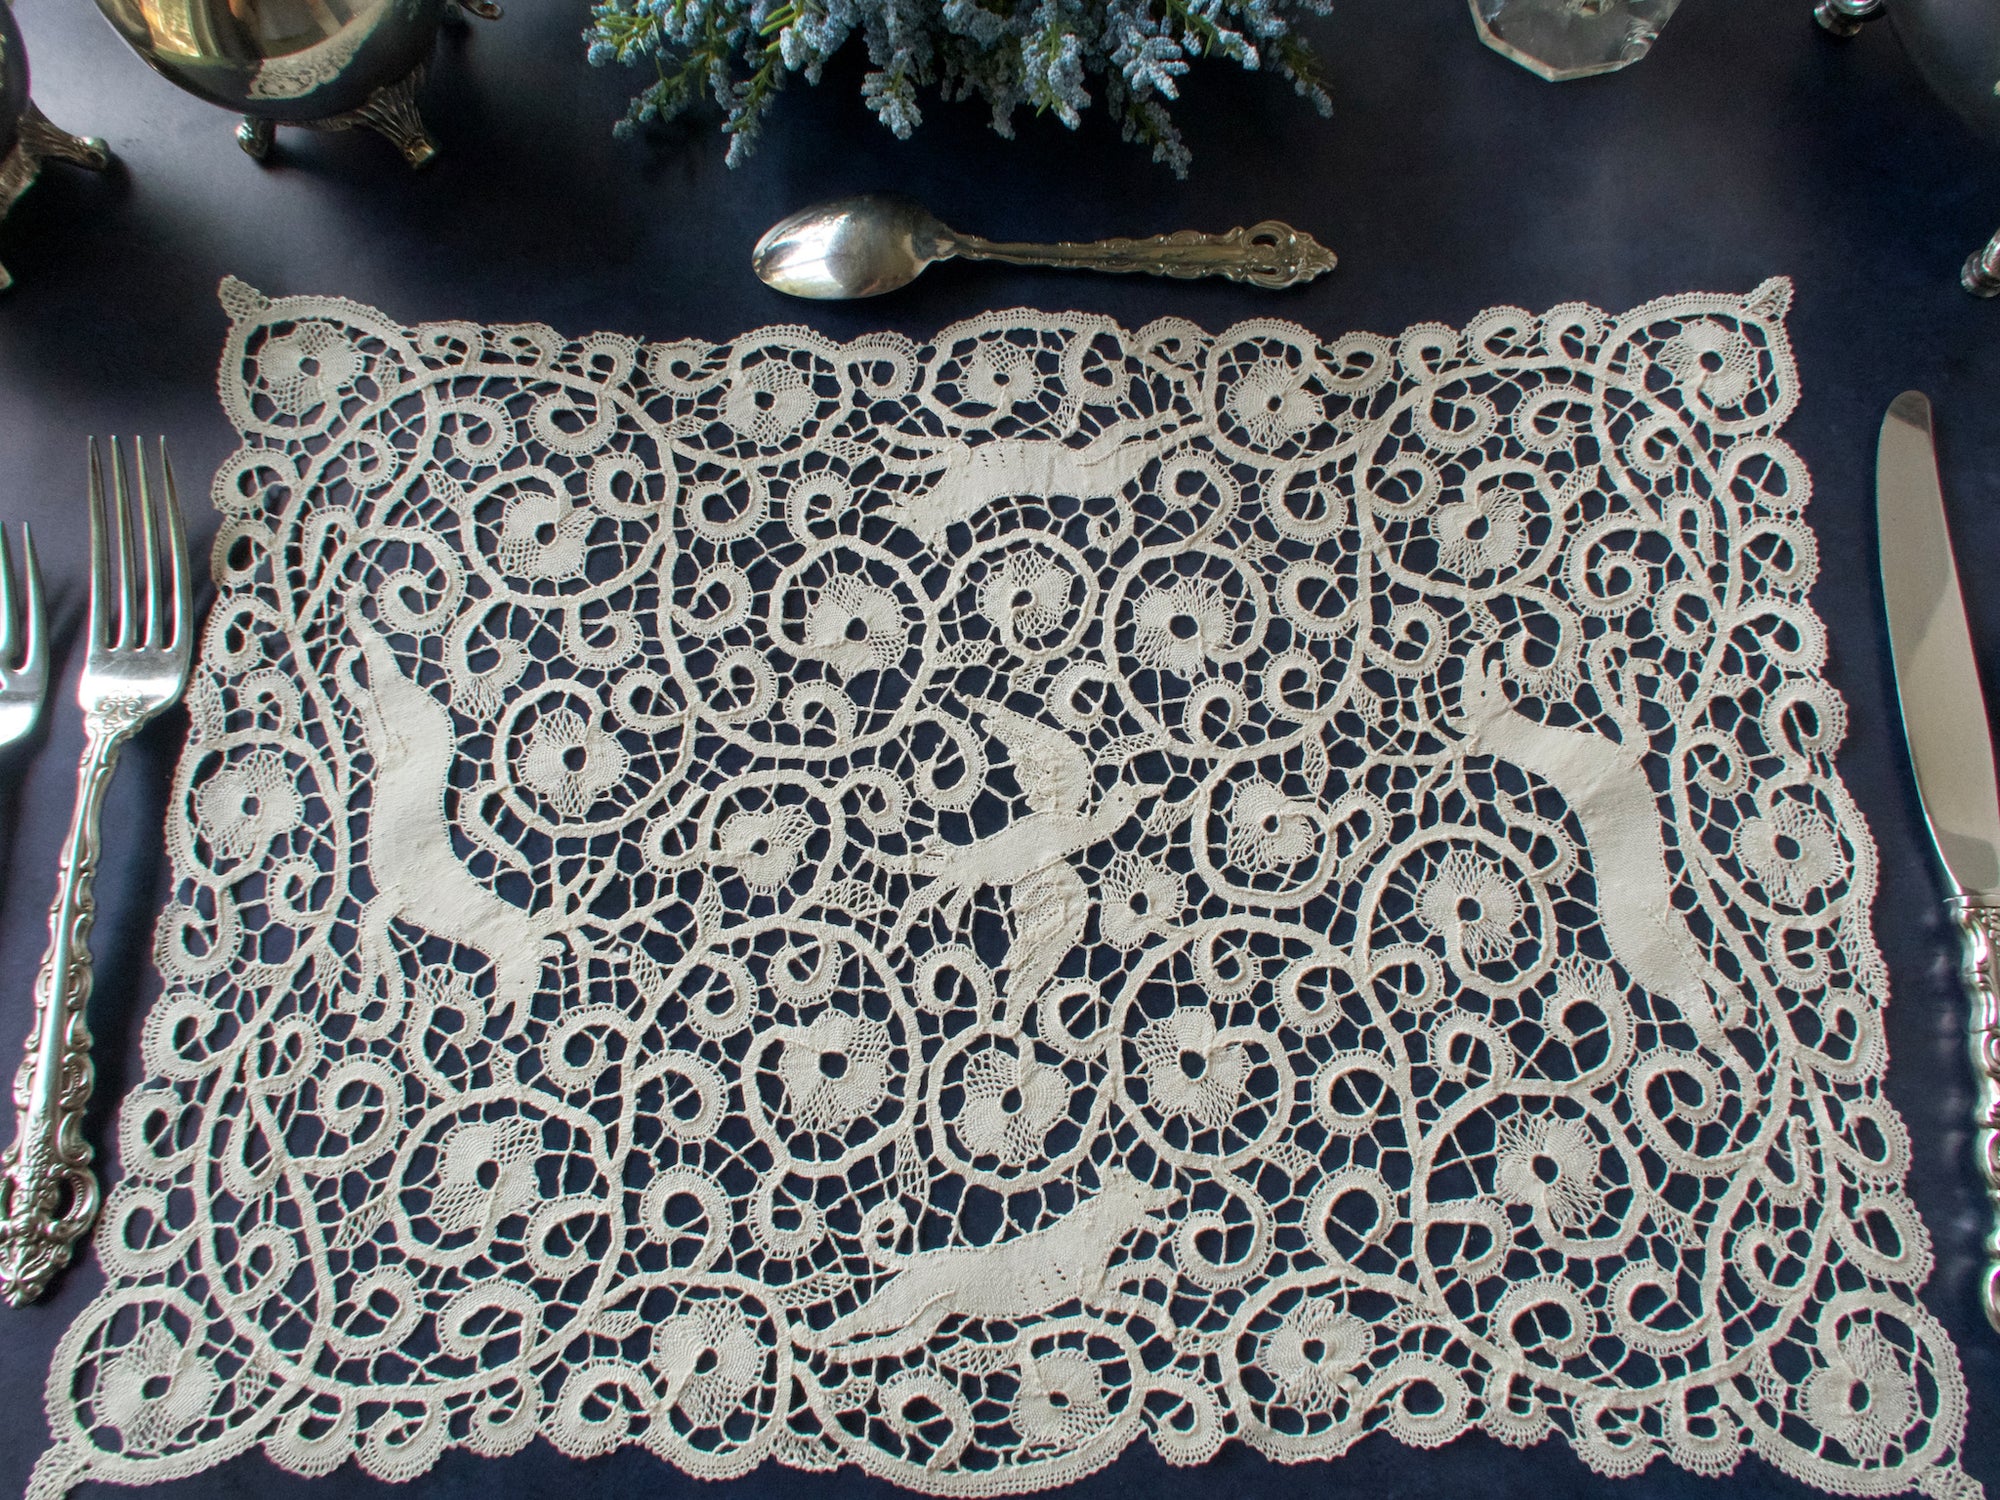 Birds, Deer & Dogs Vintage Italian Cantu Lace Placemats, Set of 12